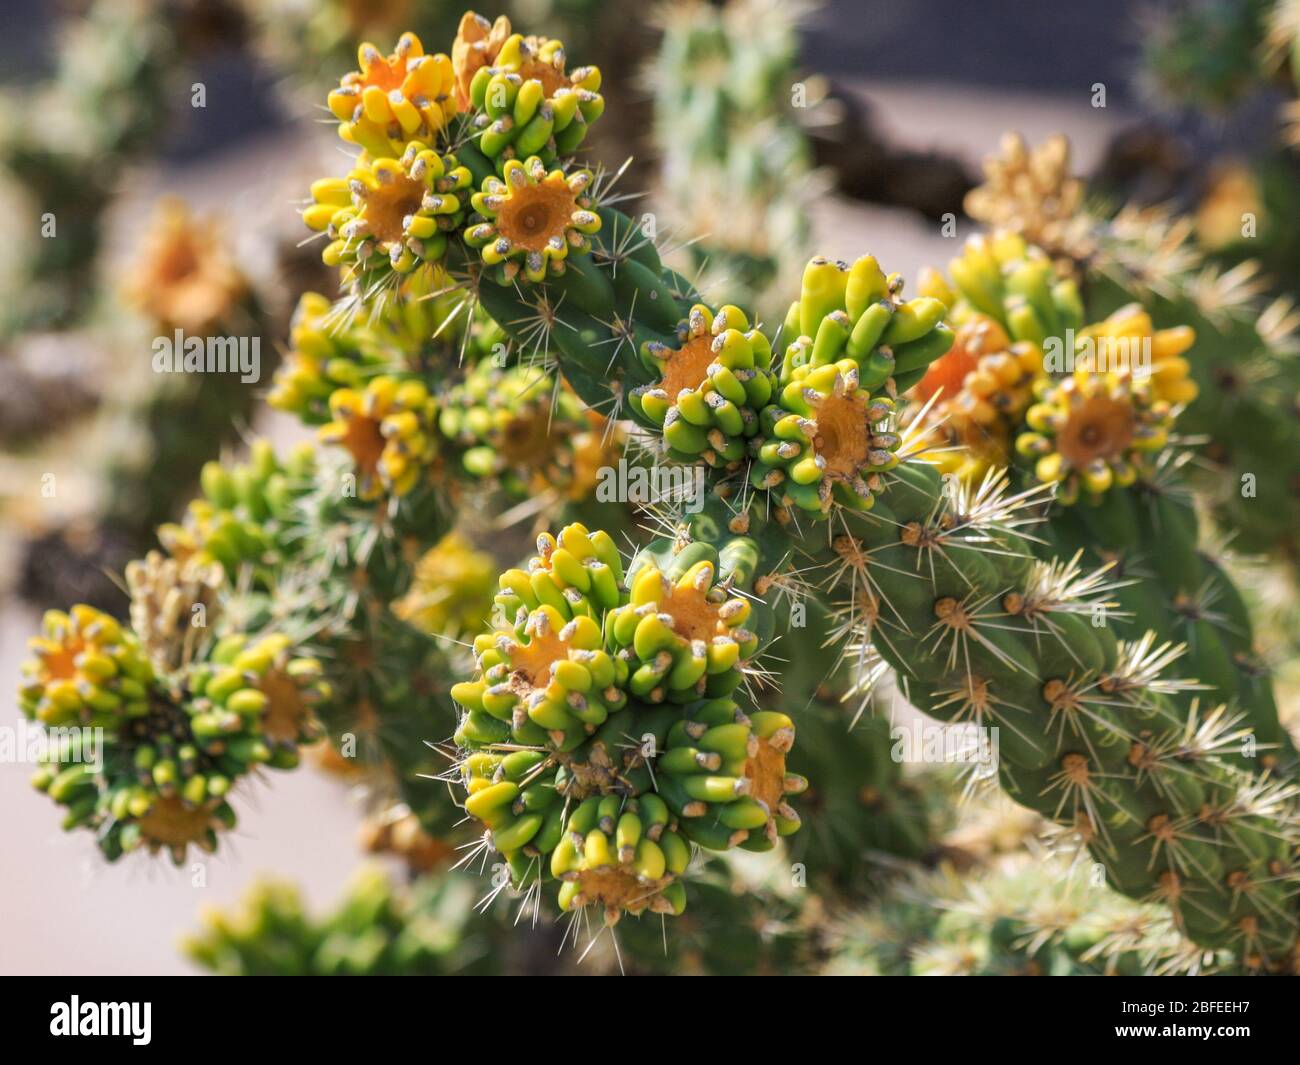 Fruit of Cane Cholla cactus growing wild in desert, New Mexico, United States of America. 'Cylindropuntia Spinosior' flowering green yellow fruit Stock Photo